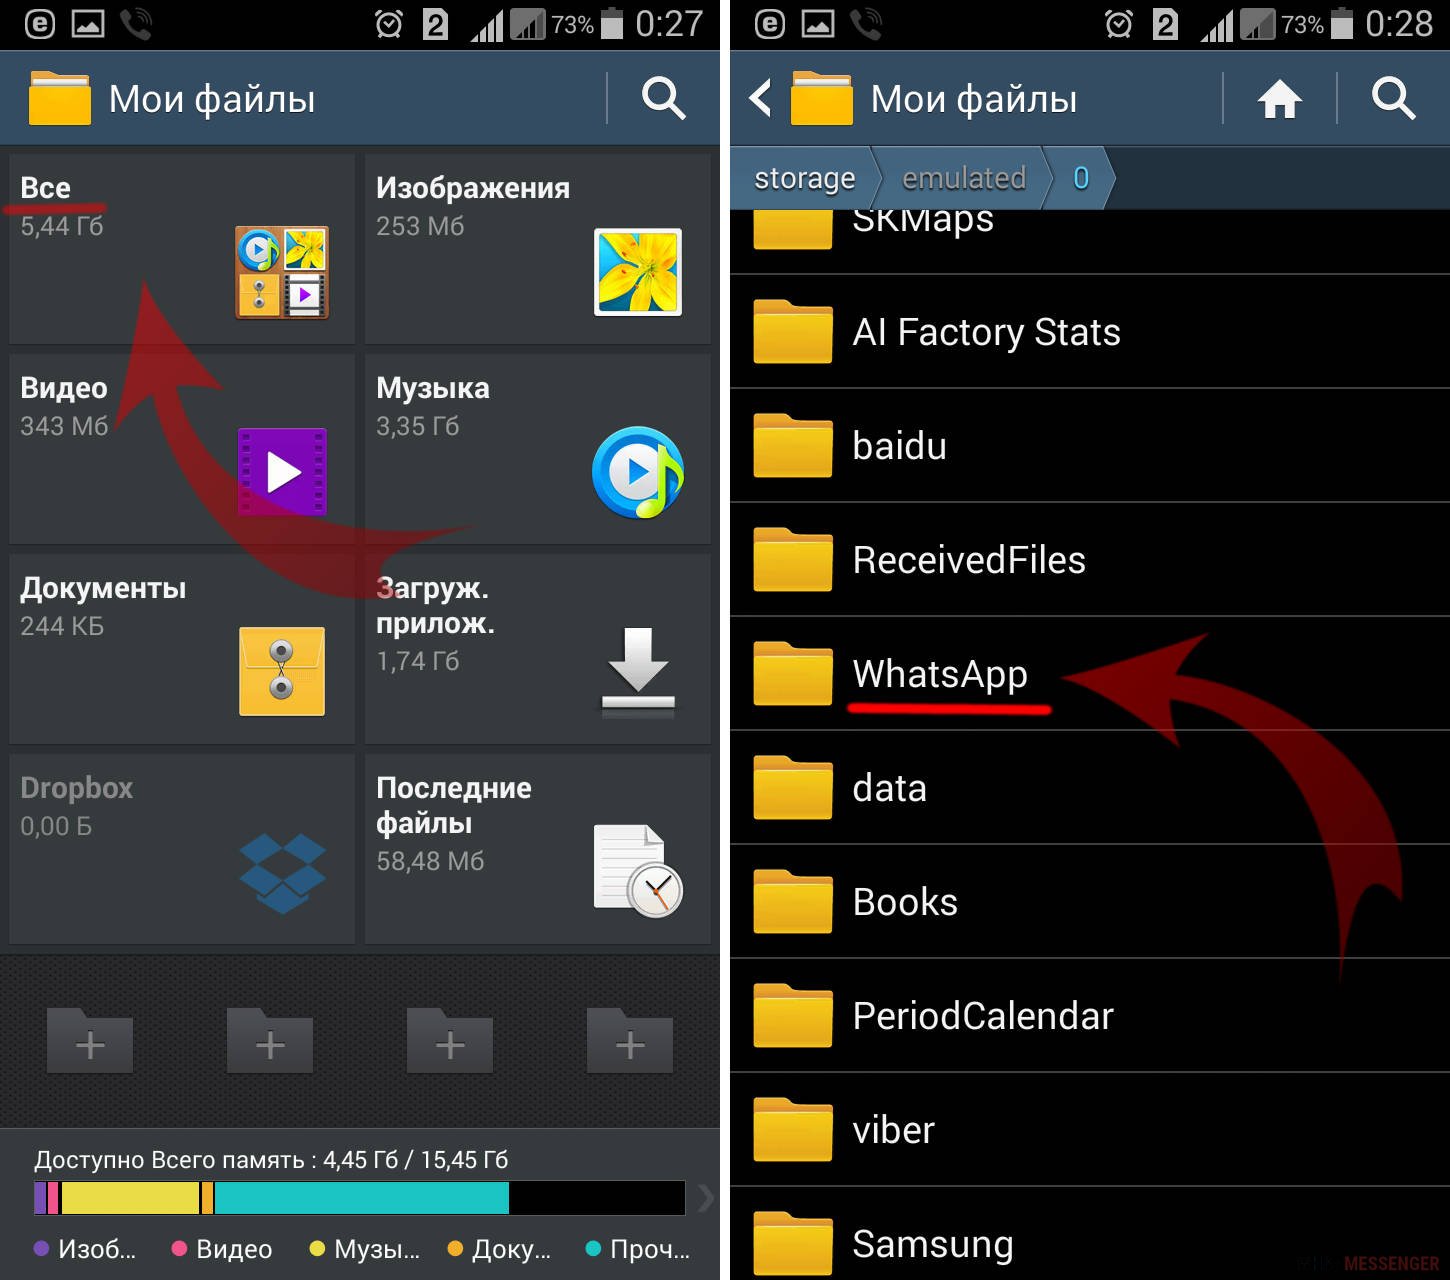 how to download whtsapp backup from onedrive to android